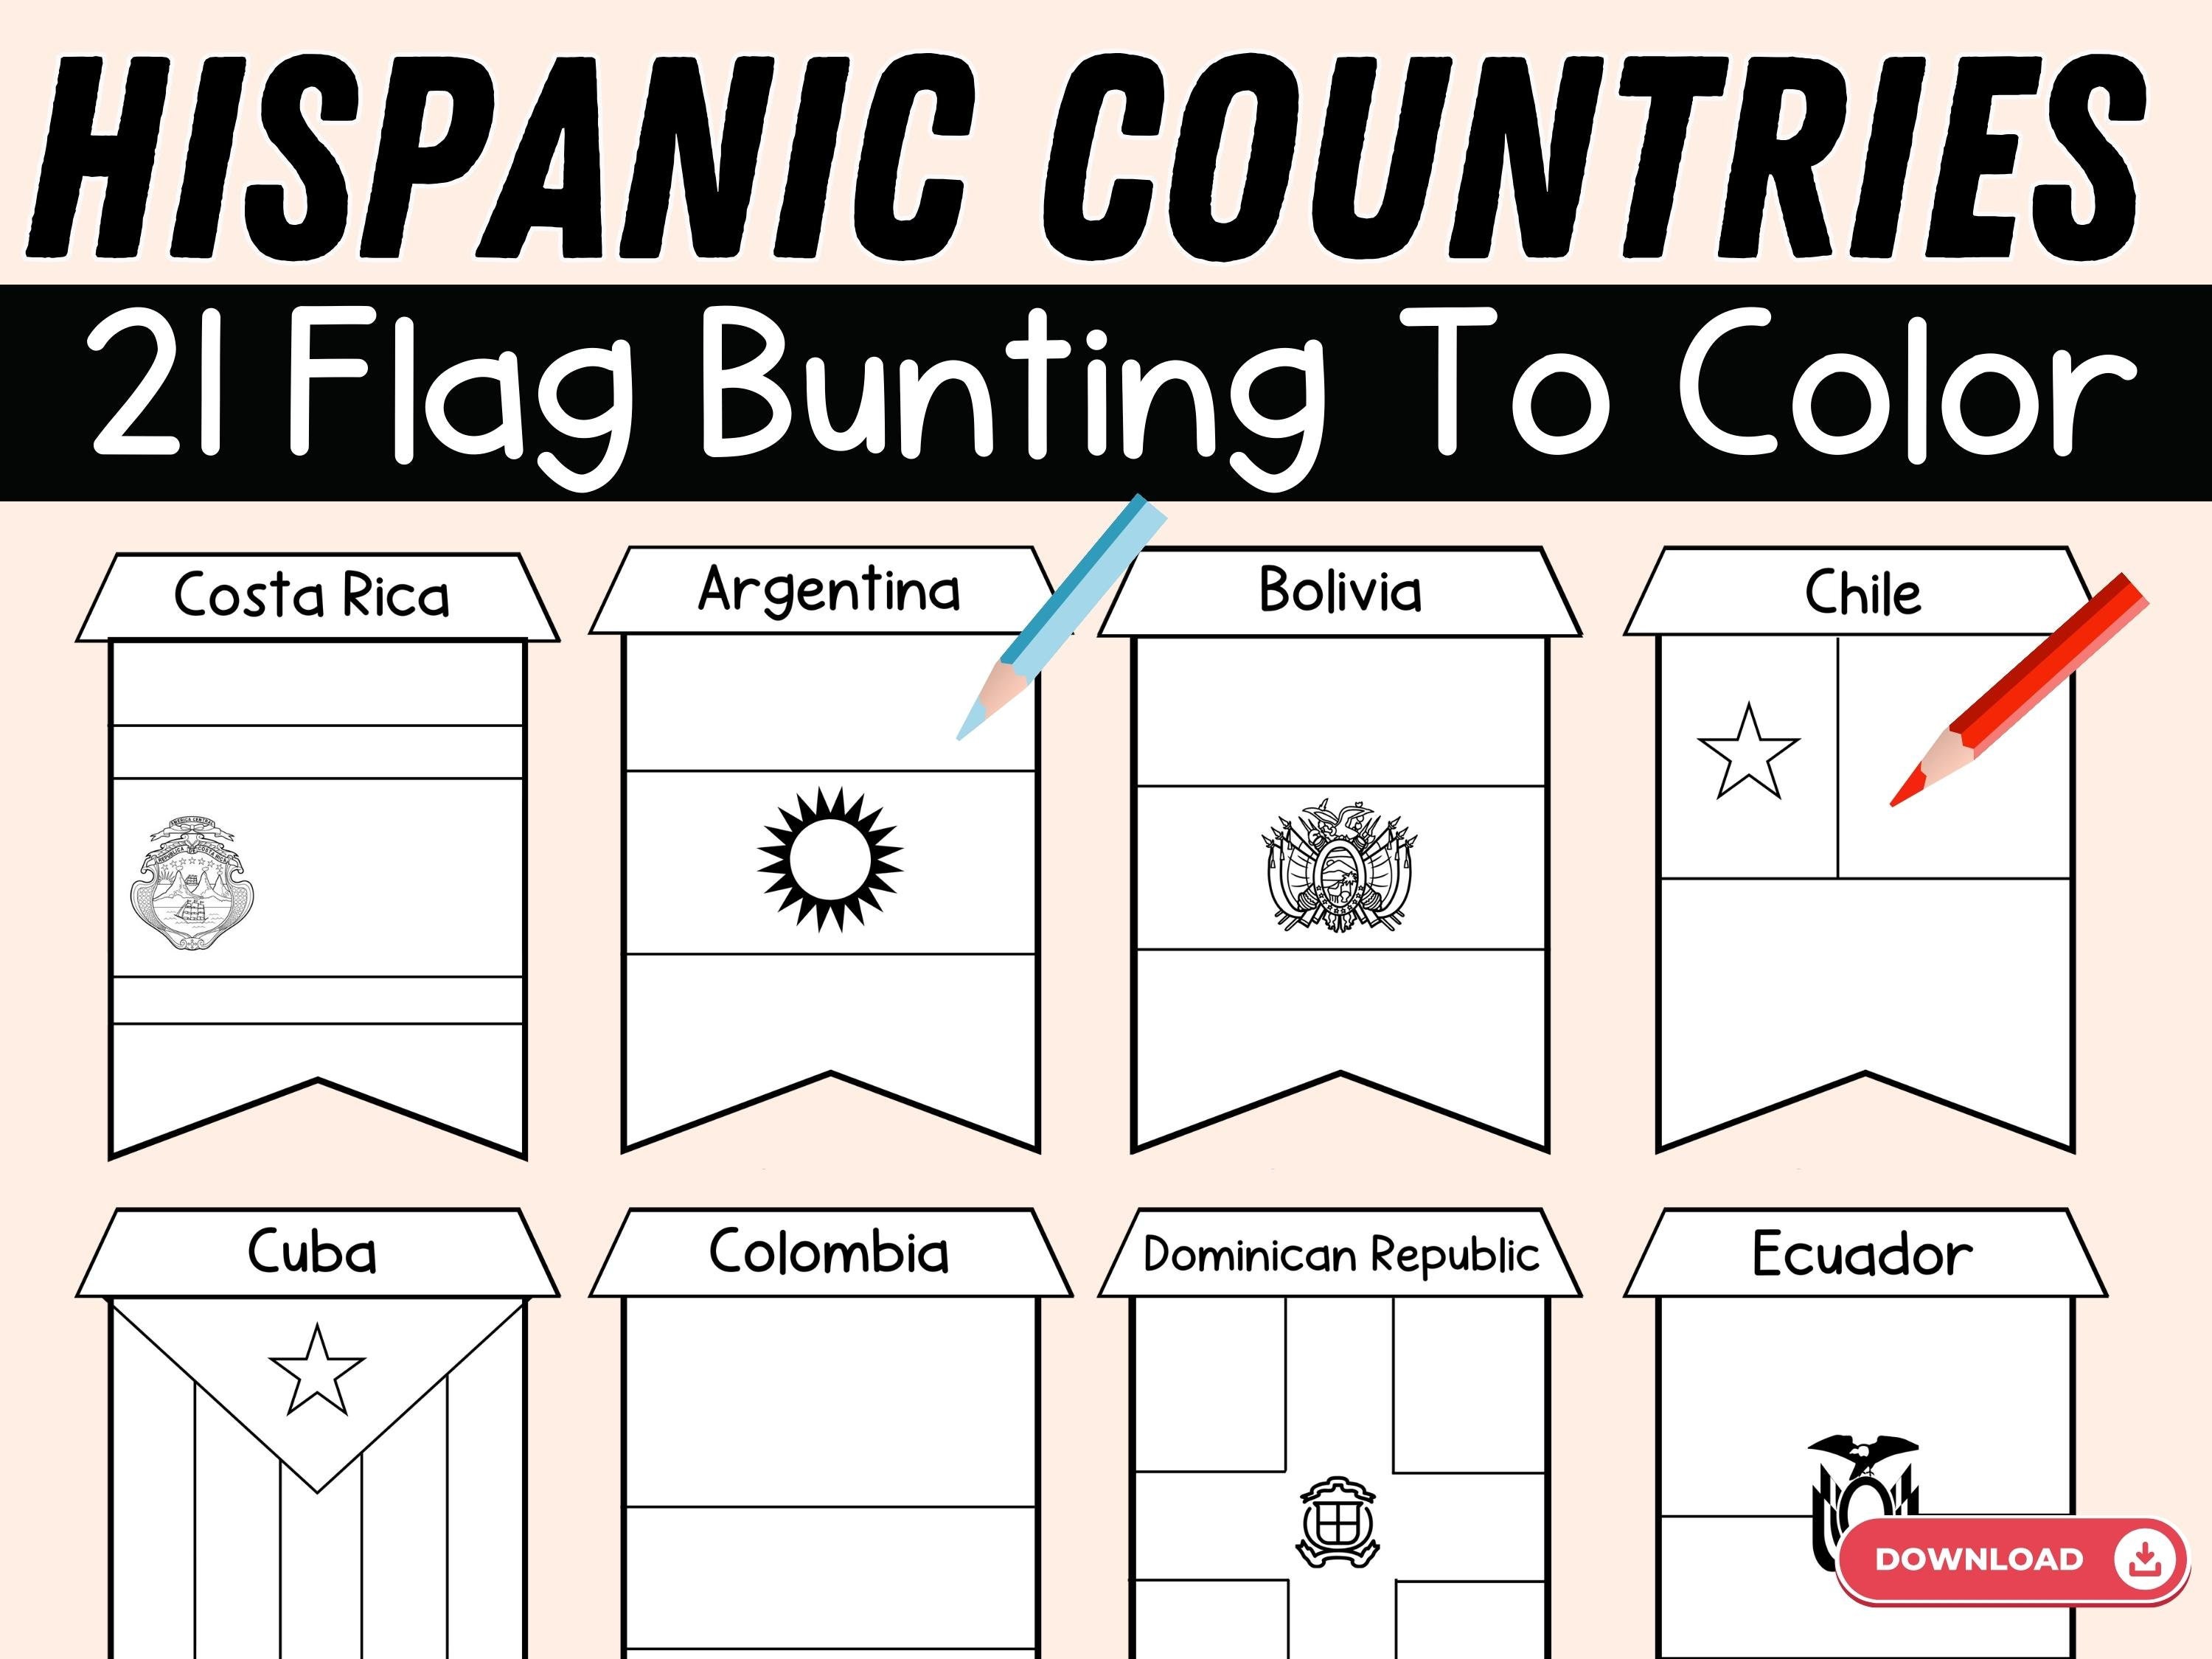 Hispanic country flags coloring pages hispanic heritage month flag bunting to color spanish speaking countries banner coloring activity